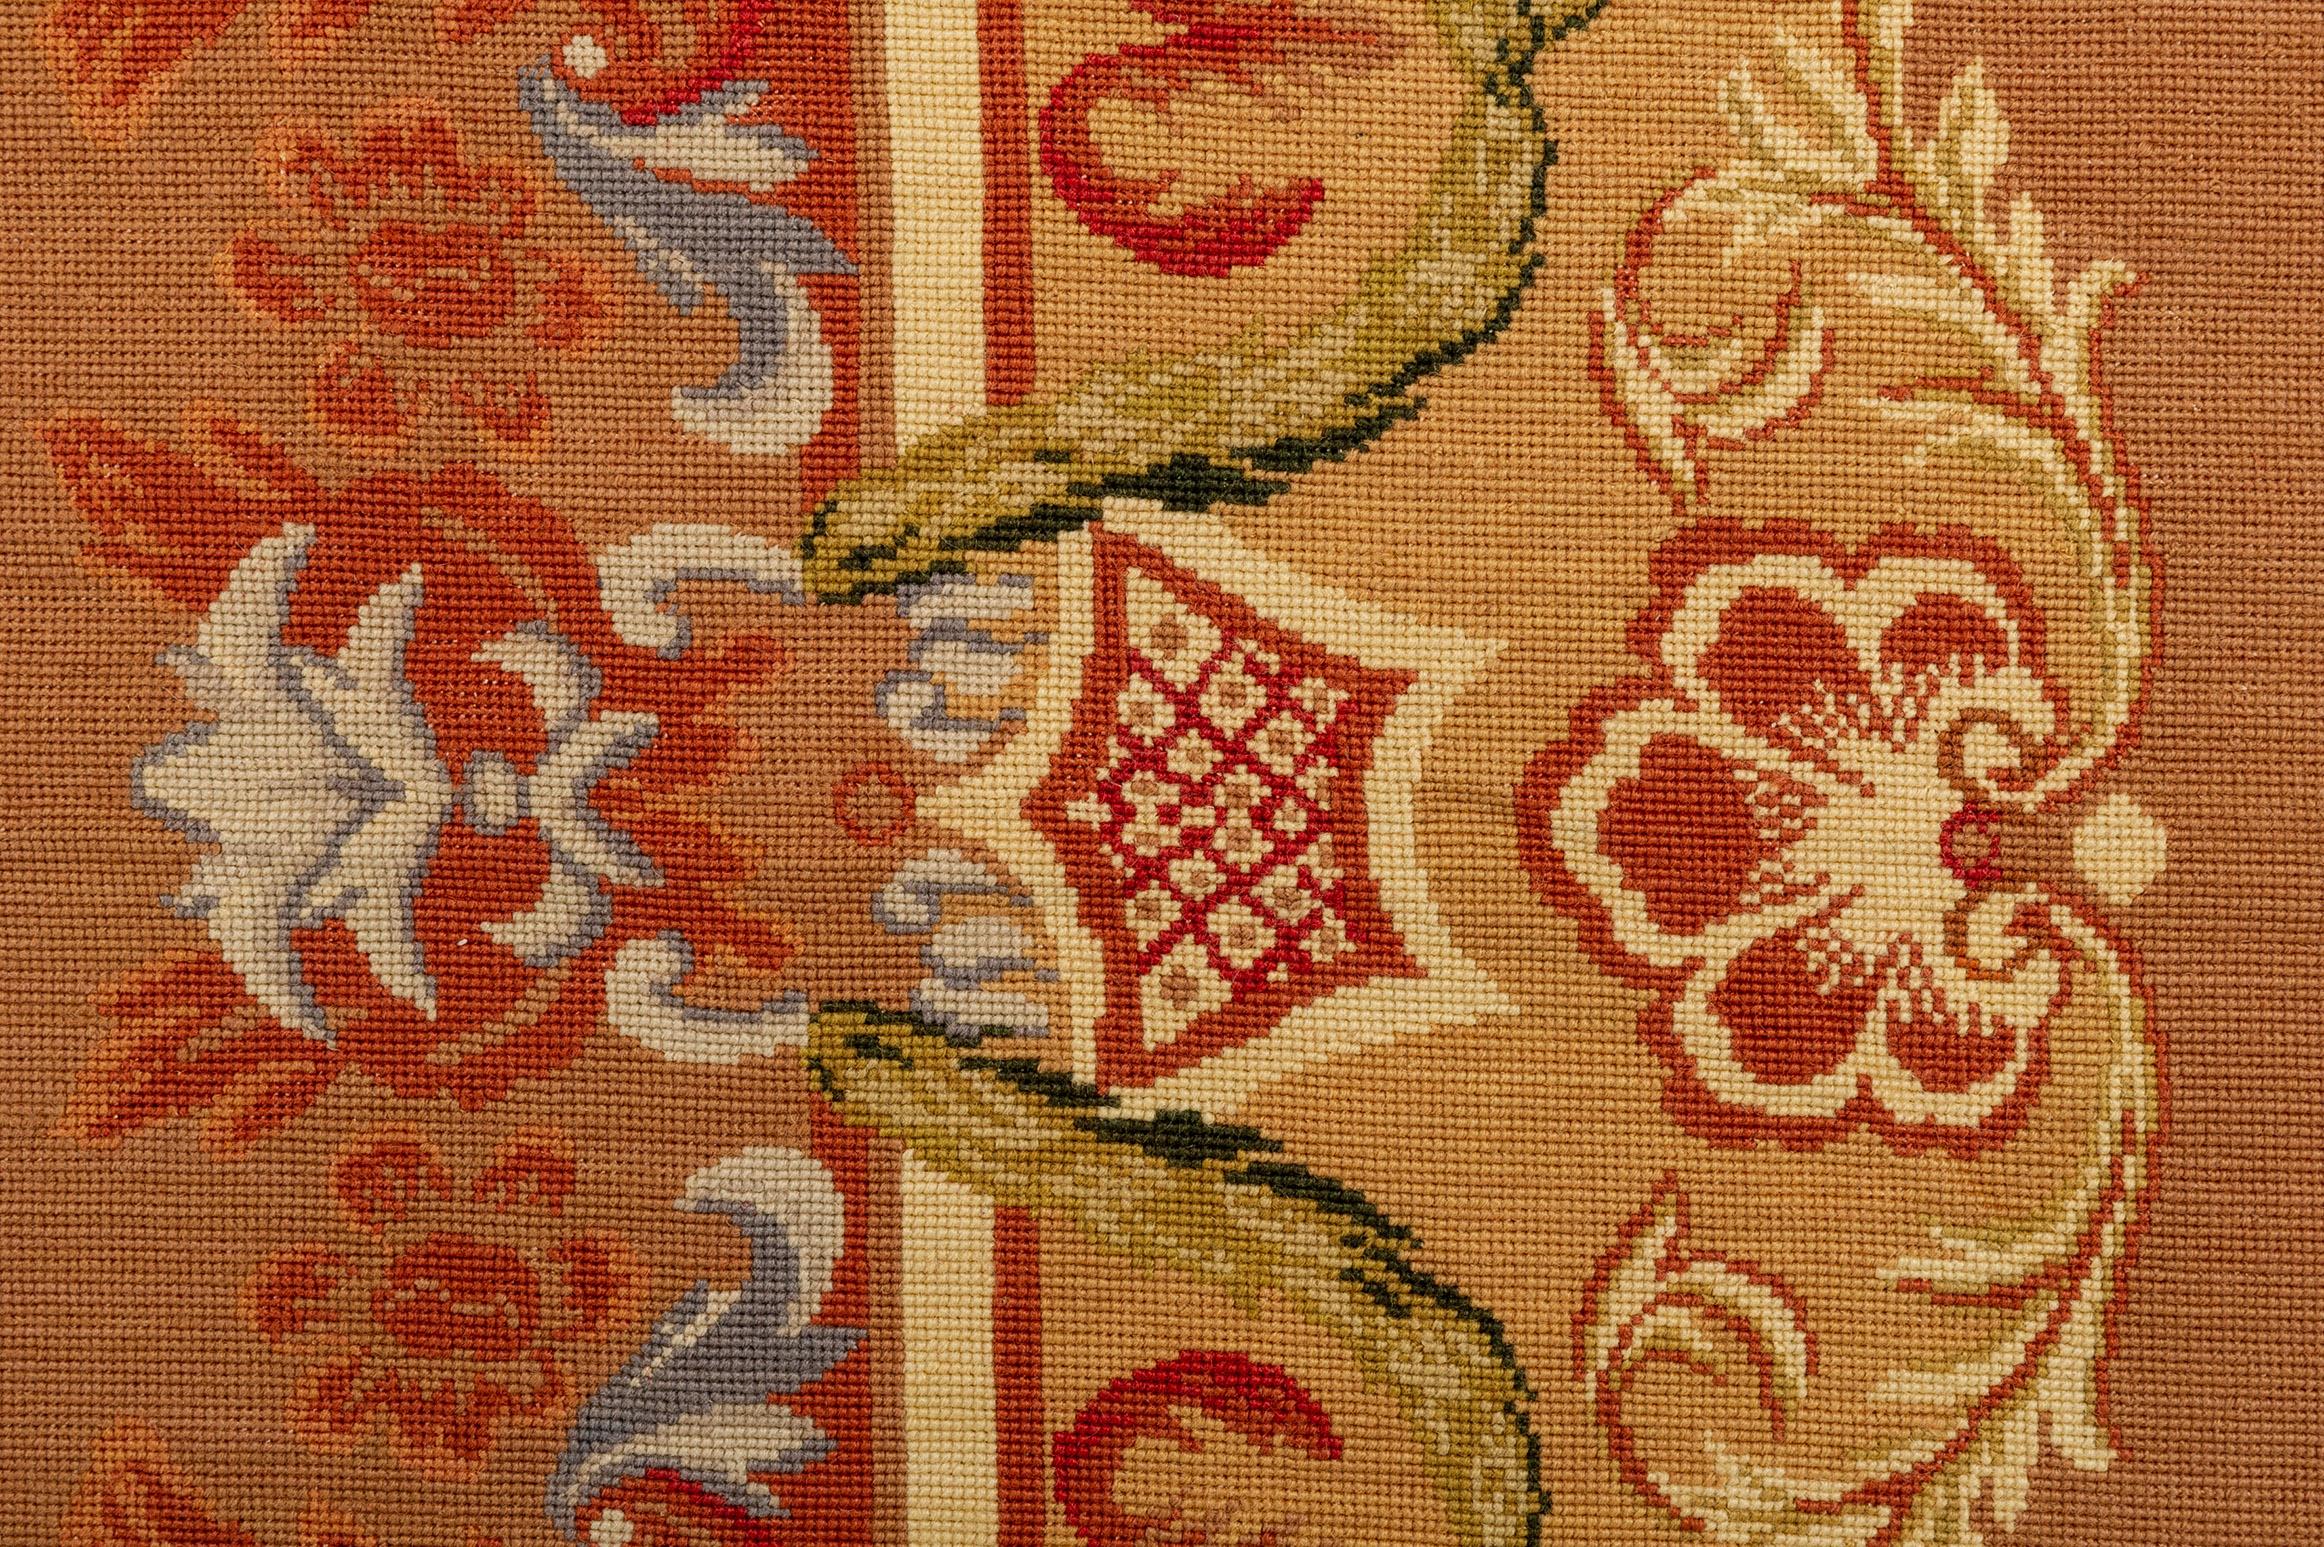 Needle Point Carpet or Tapestry in Aubusson Style For Sale 5